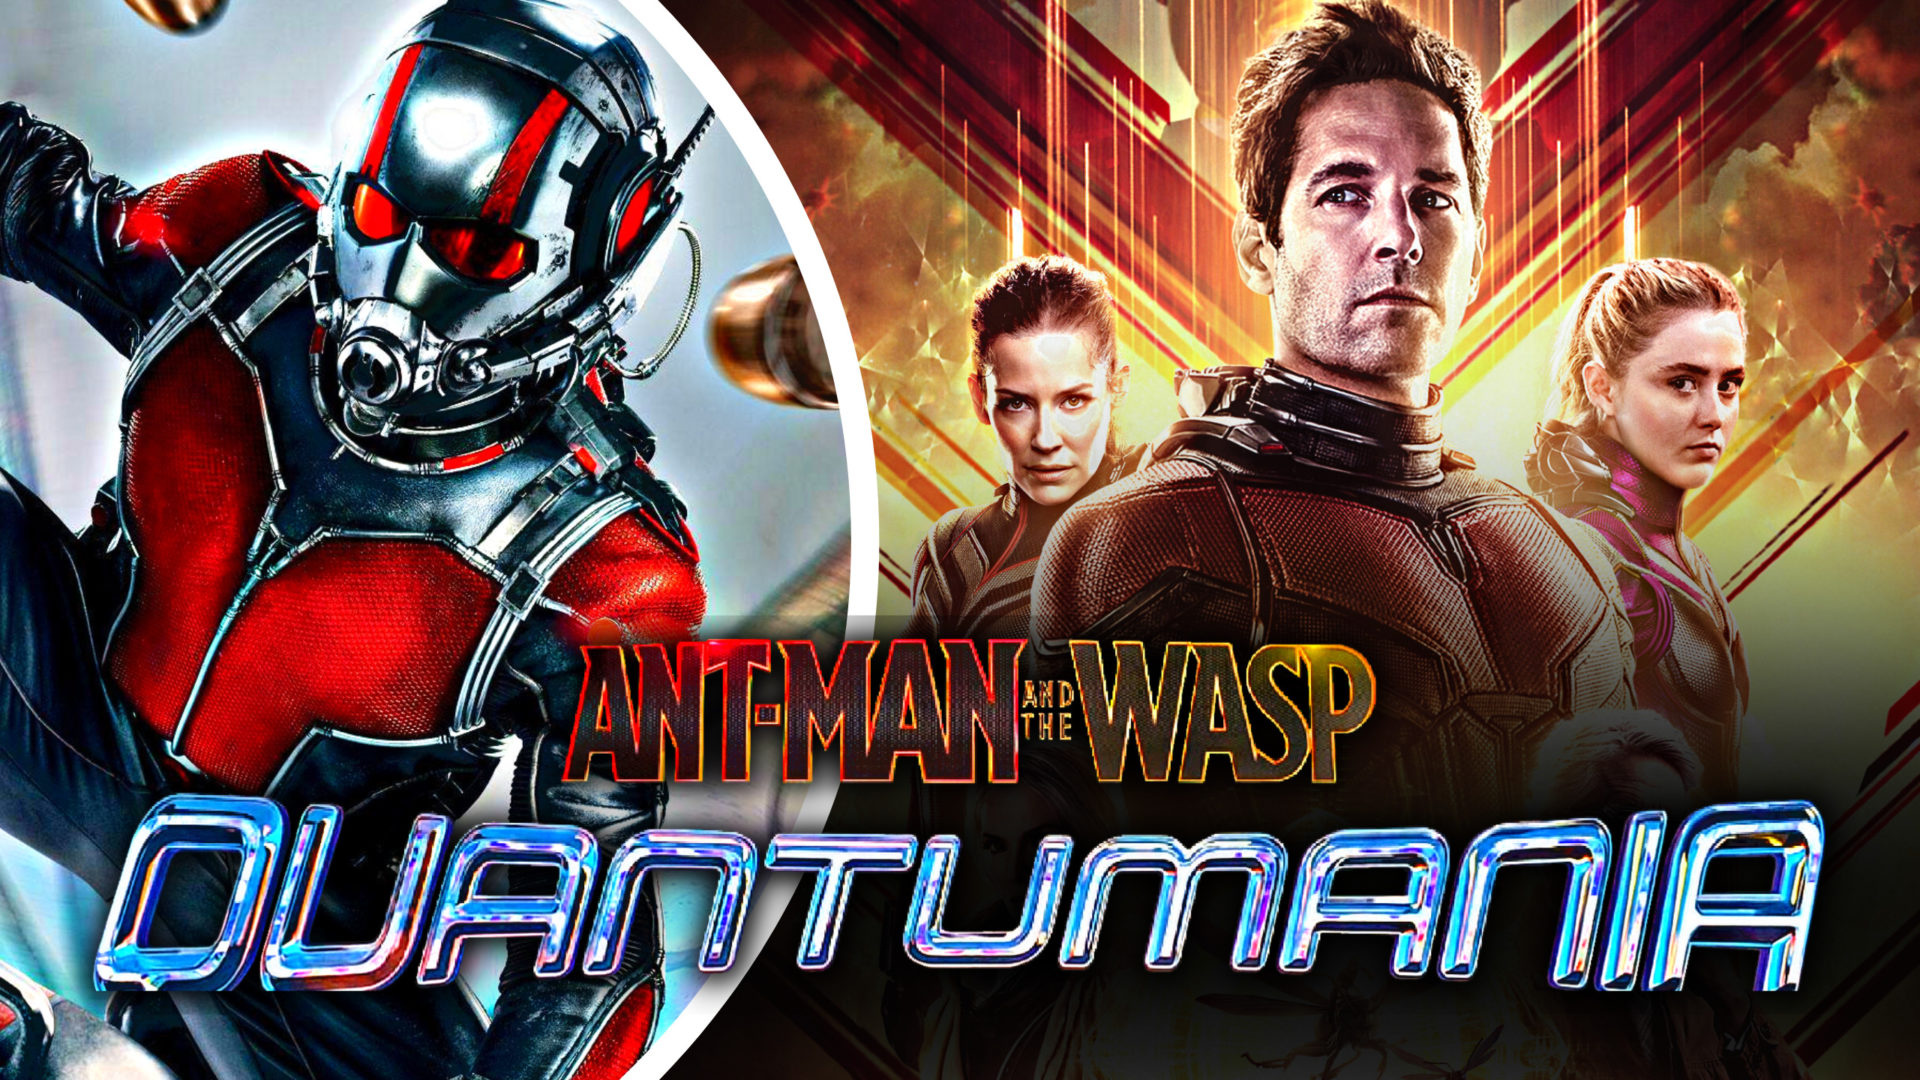 Ant-Man and the Wasp: Quantumania: A third Ant-Man film, Lang and van Dyne exploring the Quantum Realm. 1920x1080 Full HD Background.